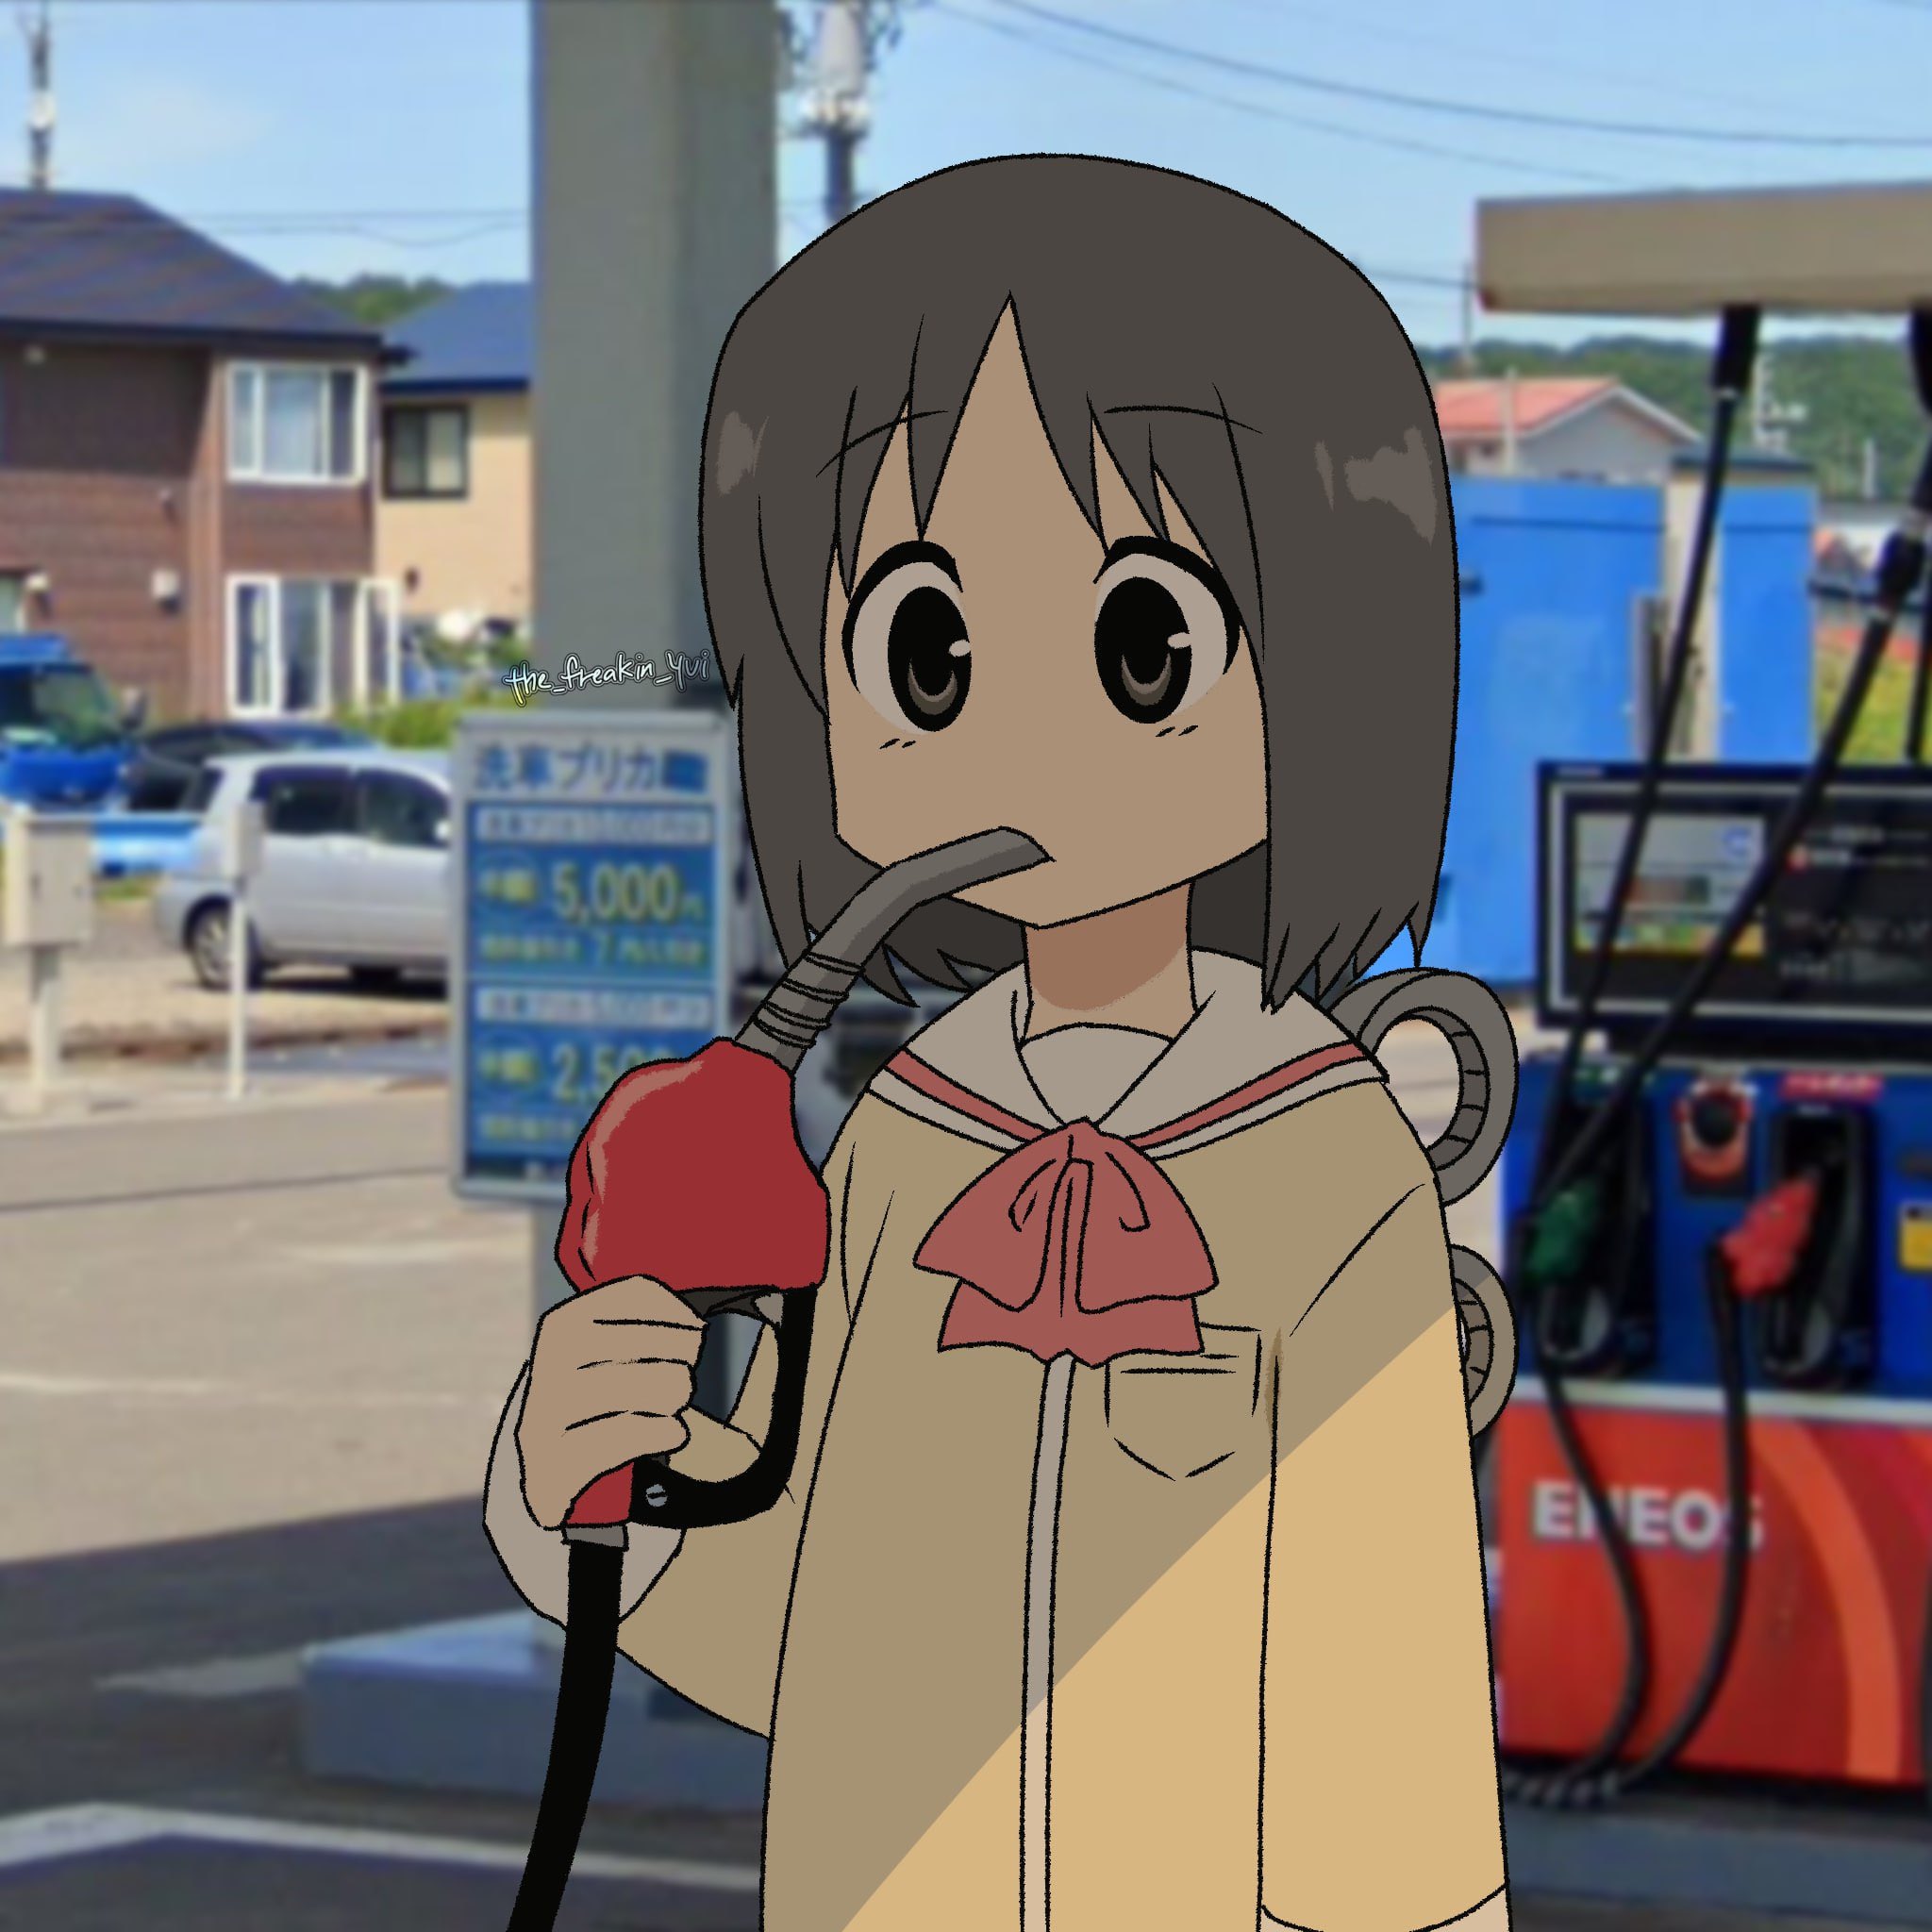 anime girl photoshopped to be drinking from gas pump. I don't know, it just fits my current mood.